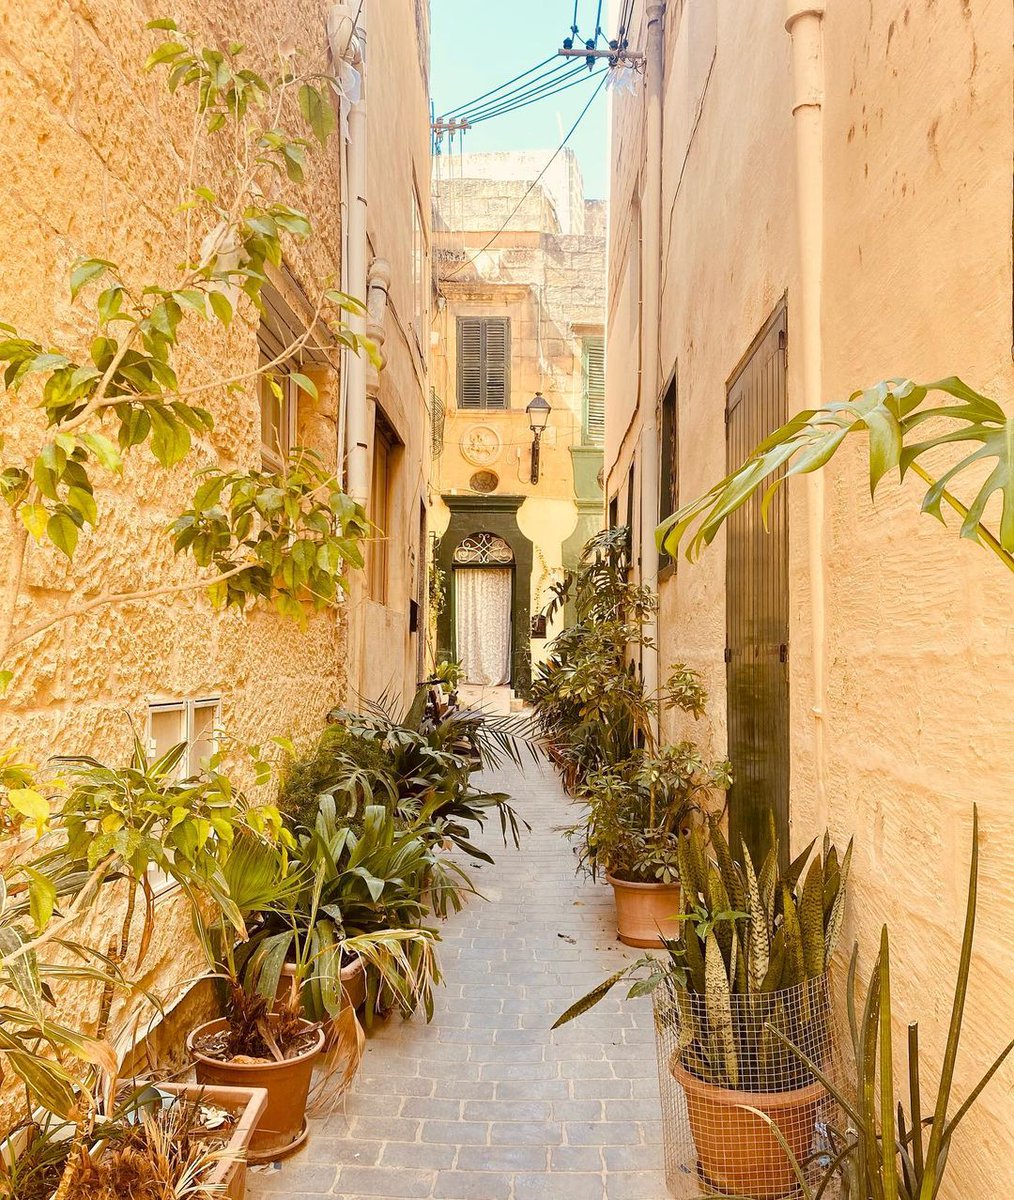 The quaint streets and houses are iconic of the capital city of Gozo, Victoria 🪴 Photo 📸: mathieuklimenko on instagram.com/p/CjKS0DBM4Gw To learn more about Gozo, visit: visitgozo.com #Gozo #Malta #VisitGozo #Travel #Quaint #Street #House